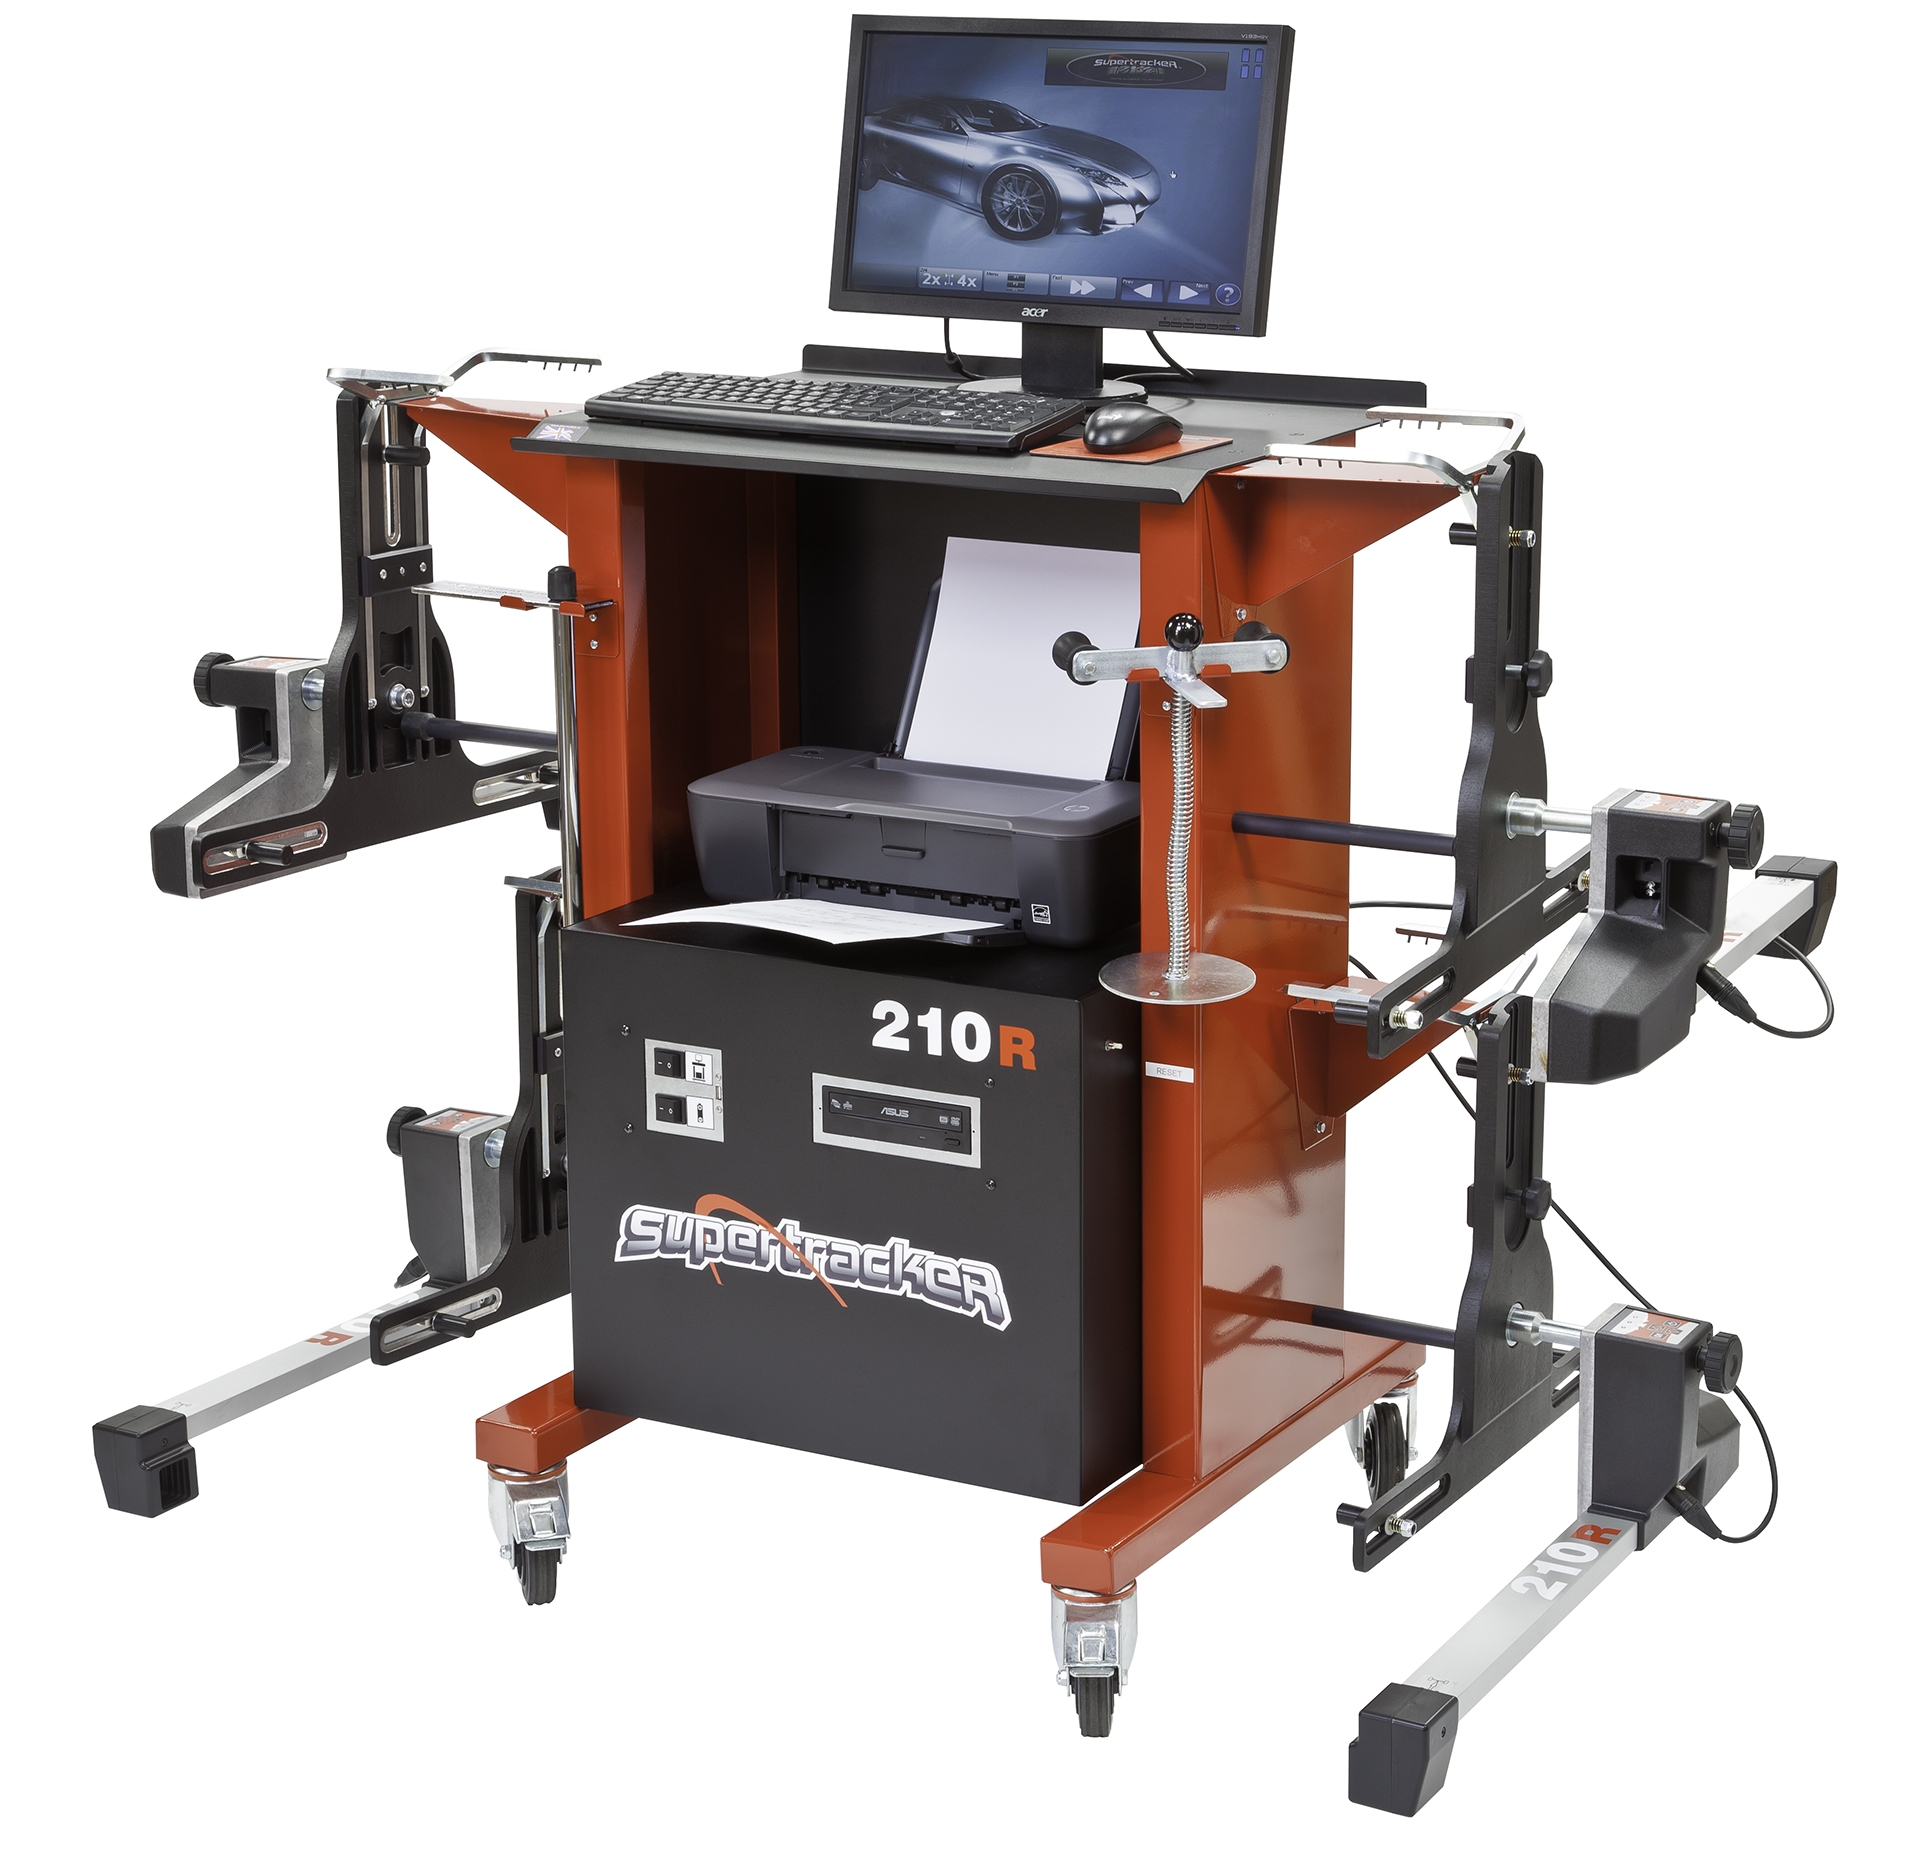 Supertracker STR210R wheel alignment system a ‘little brother’ to flagship STR420